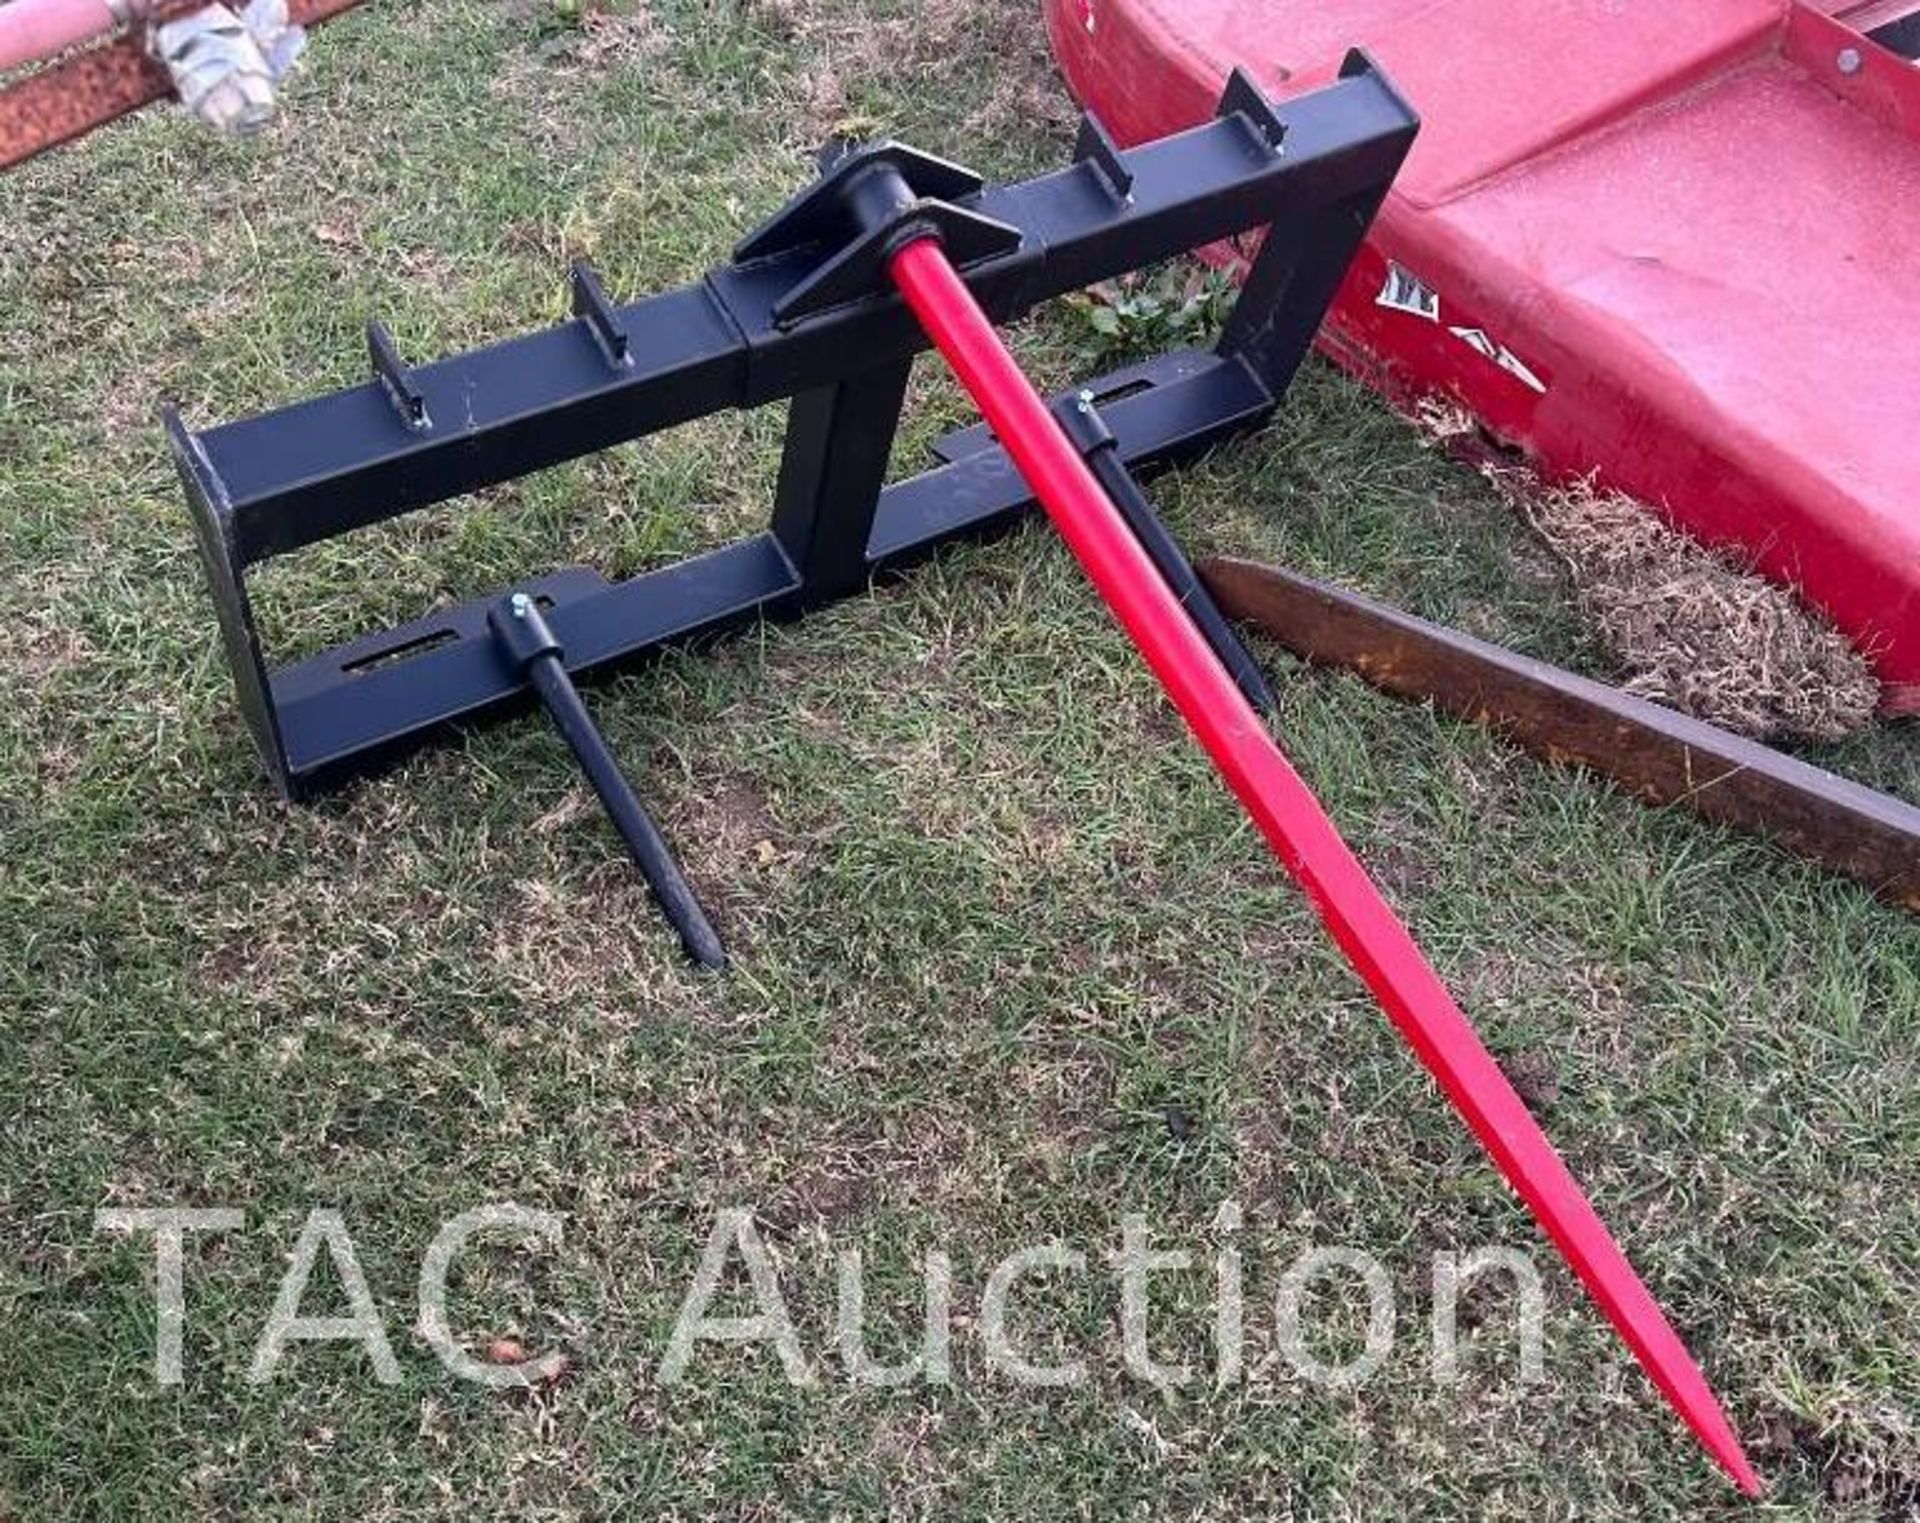 New Skid Steer Hay Spear Attachment